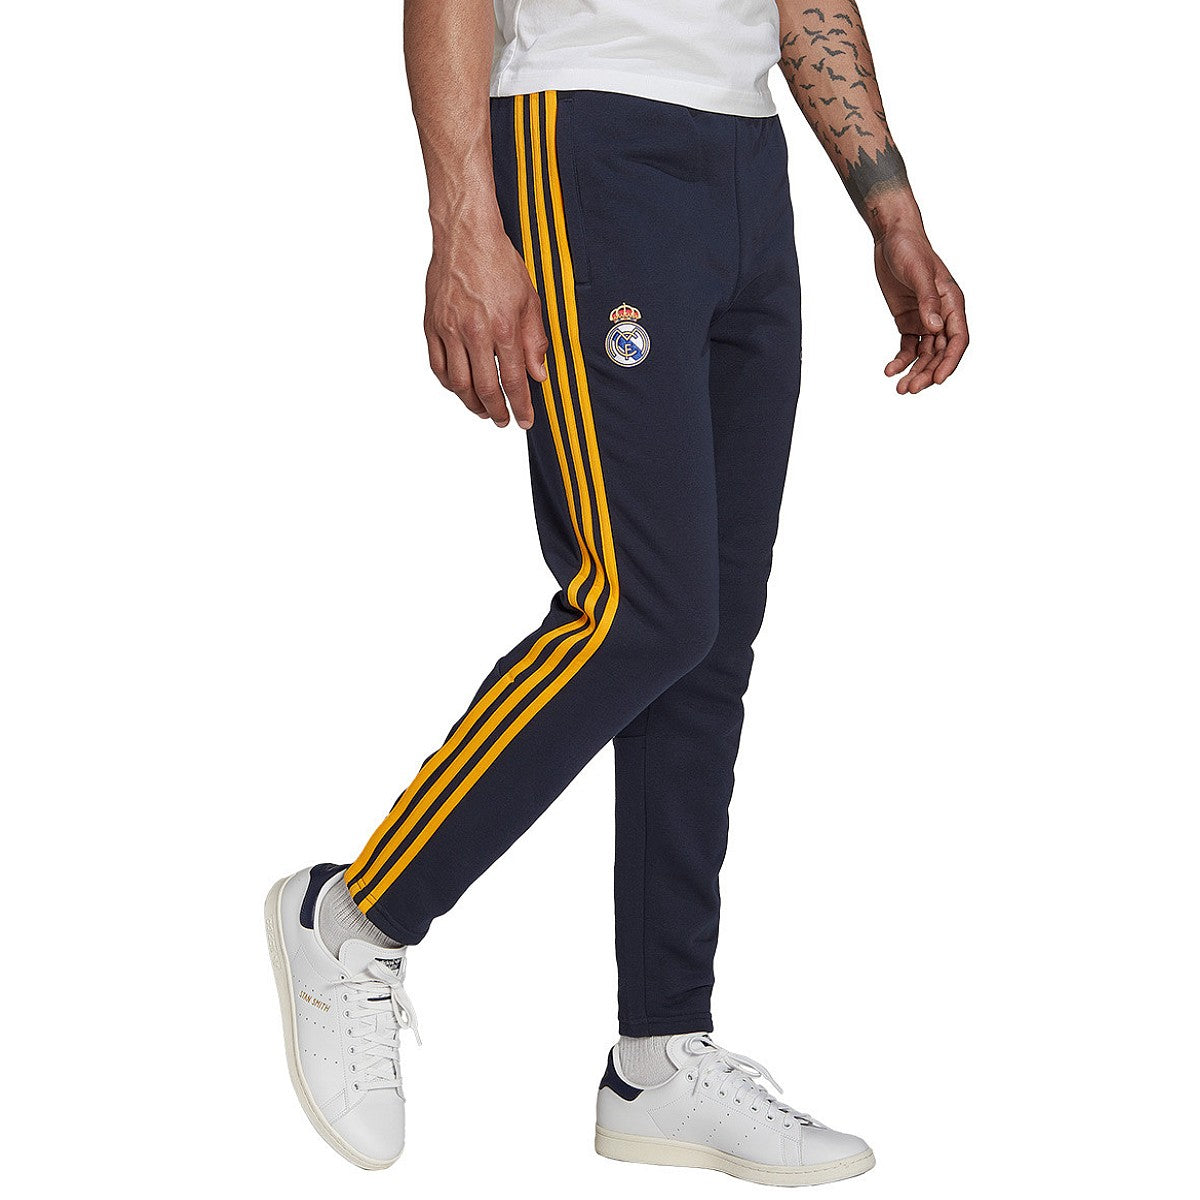 Real Madrid Casual 3S tracksuit - Adidas SoccerTracksuits.com